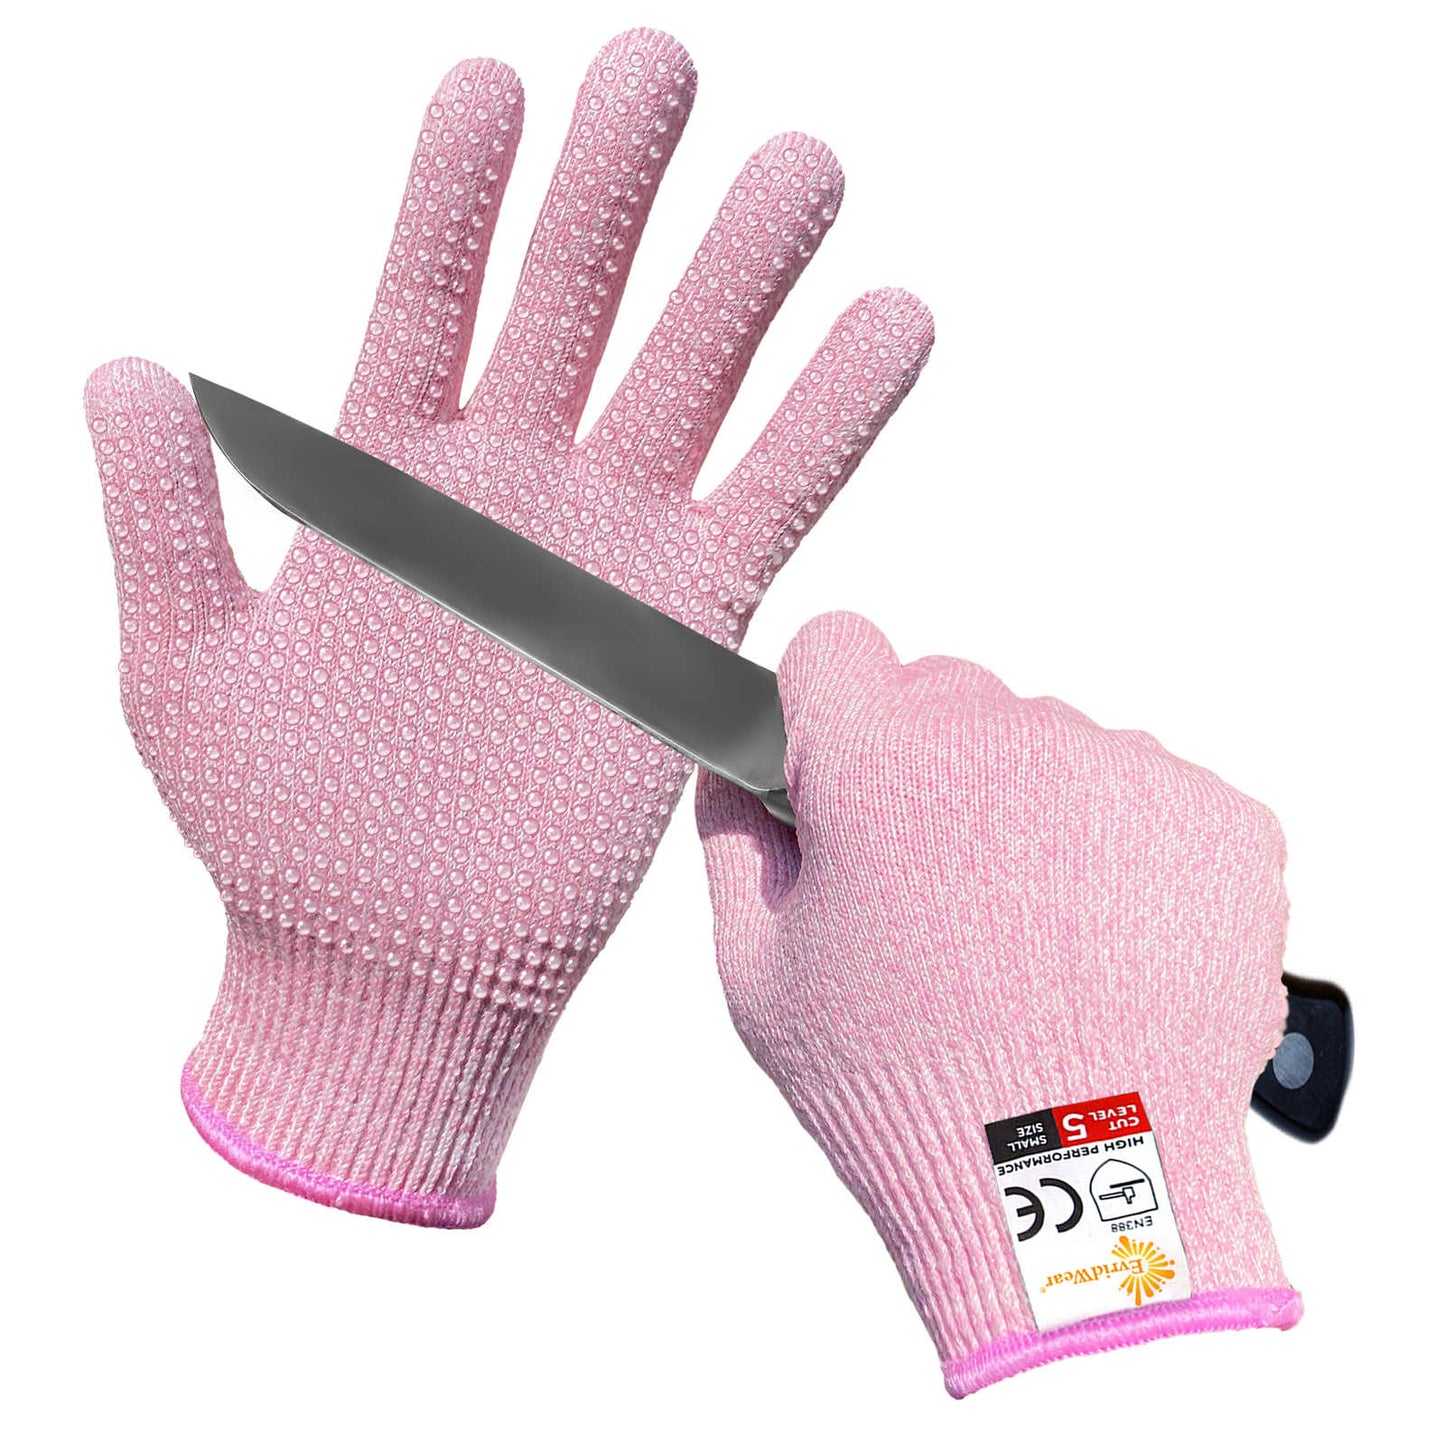 EvridWear 1 Pair Cut Resistant Work Gloves with Grip Dots, Food Grade Level 5 Safety Protective Cutting Glove (Pink)